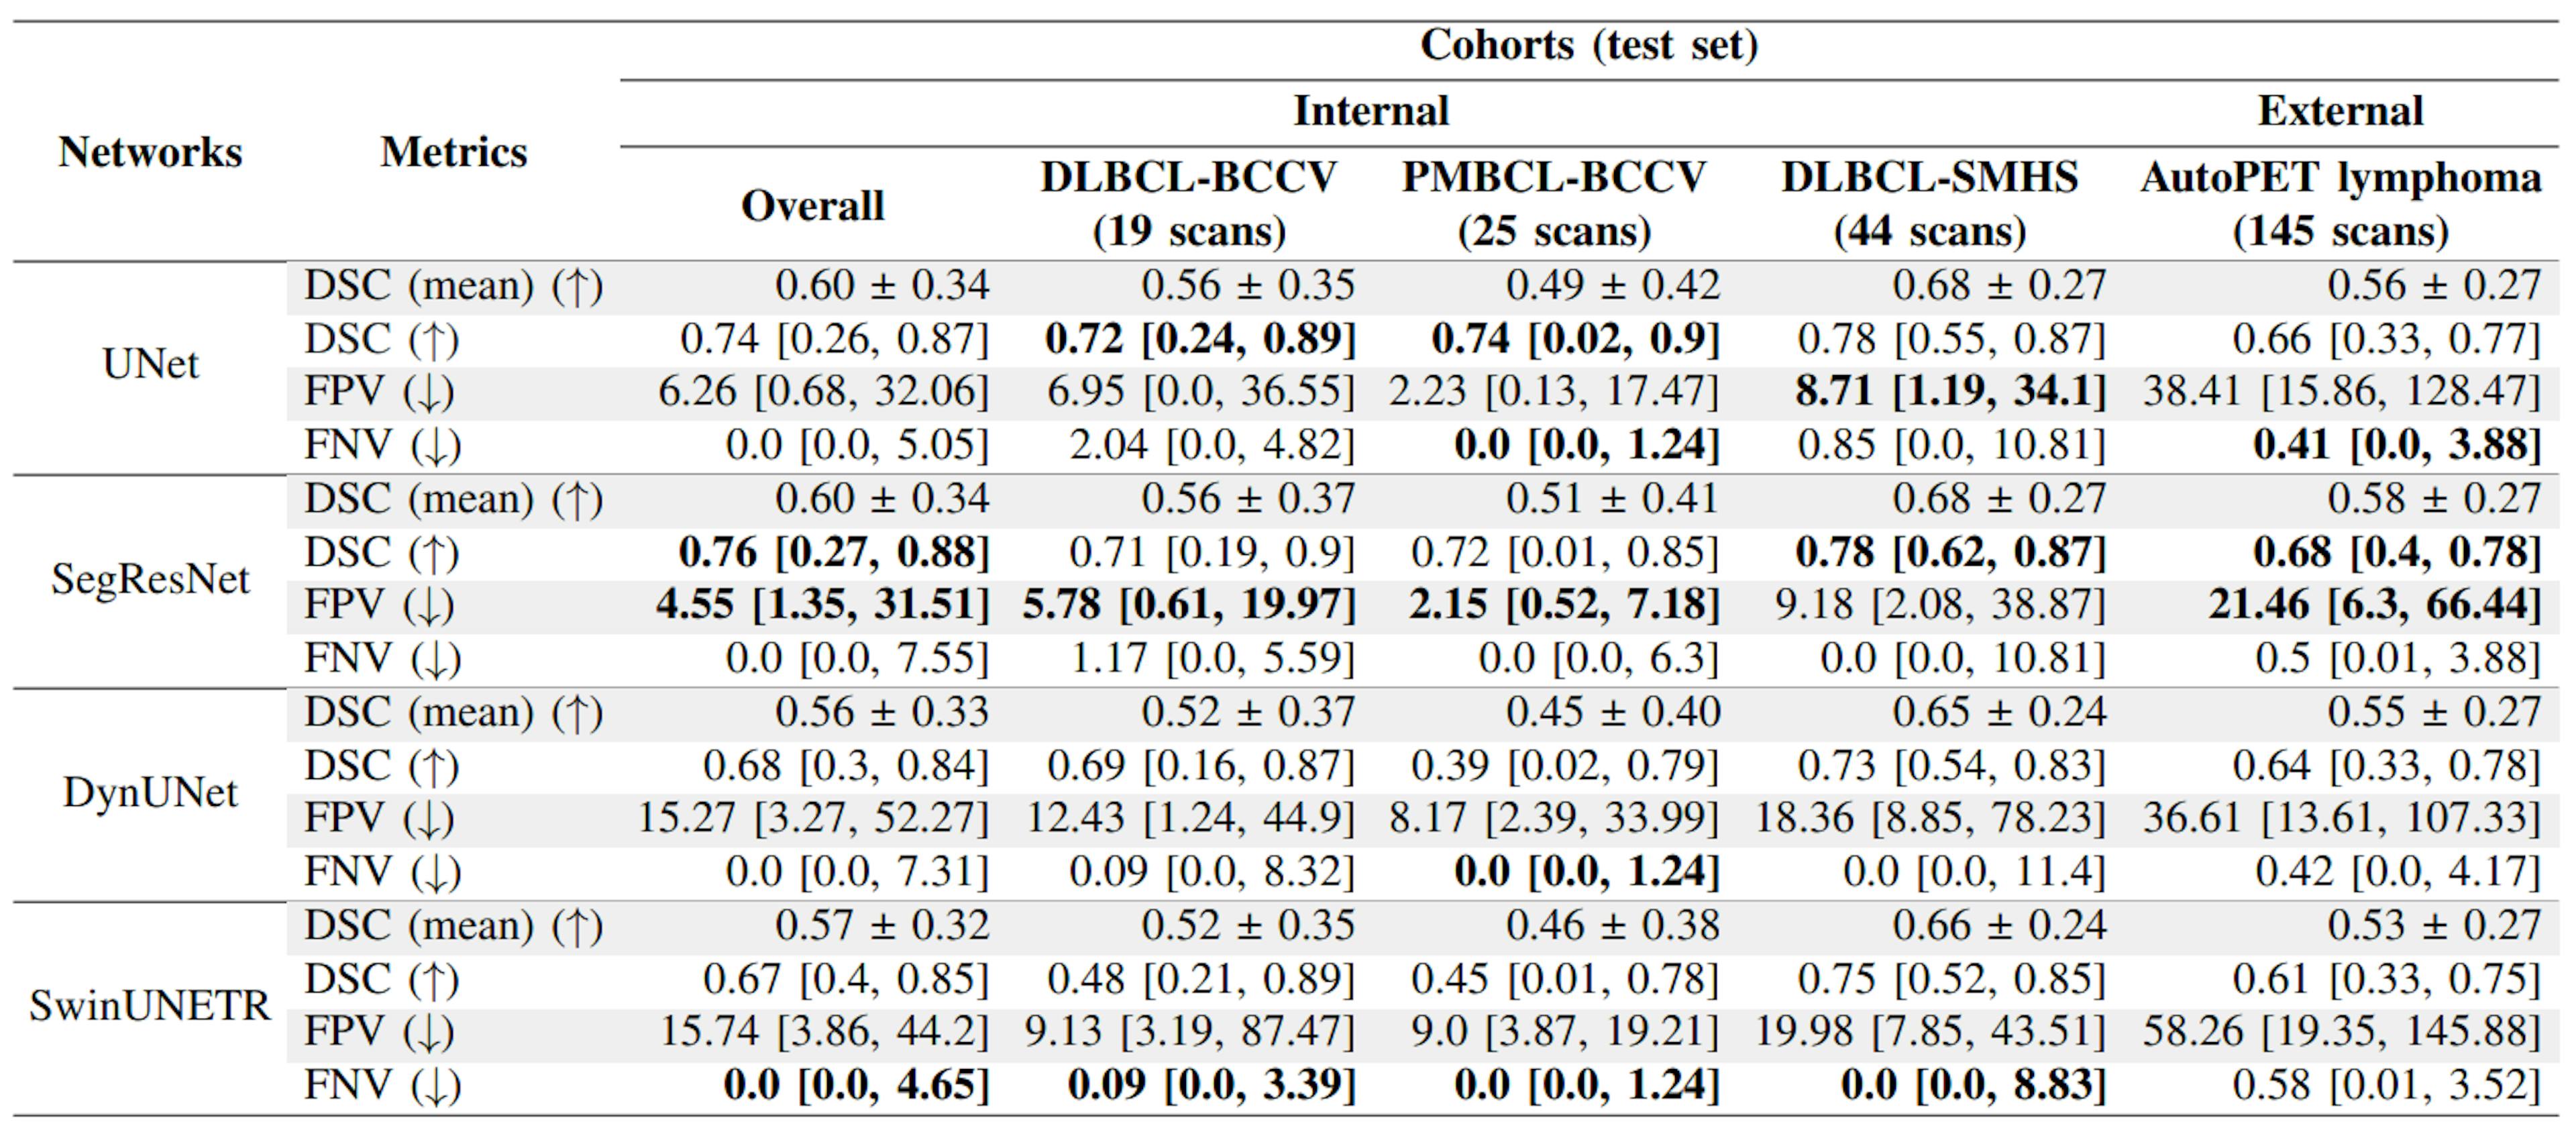 TABLE IICOMPARISON OF THE FOUR NETWORKS ON THE INTERNAL (BOTH AGGREGATED AND SEGREGATED BY DATA ORIGINS AND LYMPHOMA SUBTYPES) AND EXTERNAL TEST SETS EVALUATED VIA MEDIAN VALUES OF PATIENT-LEVEL DSC, FPV (IN ML), AND FNV (IN ML). ALL THE MEDIAN VALUES HAVE BEEN REPORTED ALONG WITH THEIR IQRS. THE MEAN PATIENT-LEVEL DSC VALUES ON THE TEST SETS ARE ALSO REPORTED WITH THE CORRESPONDING STANDARD DEVIATIONS.